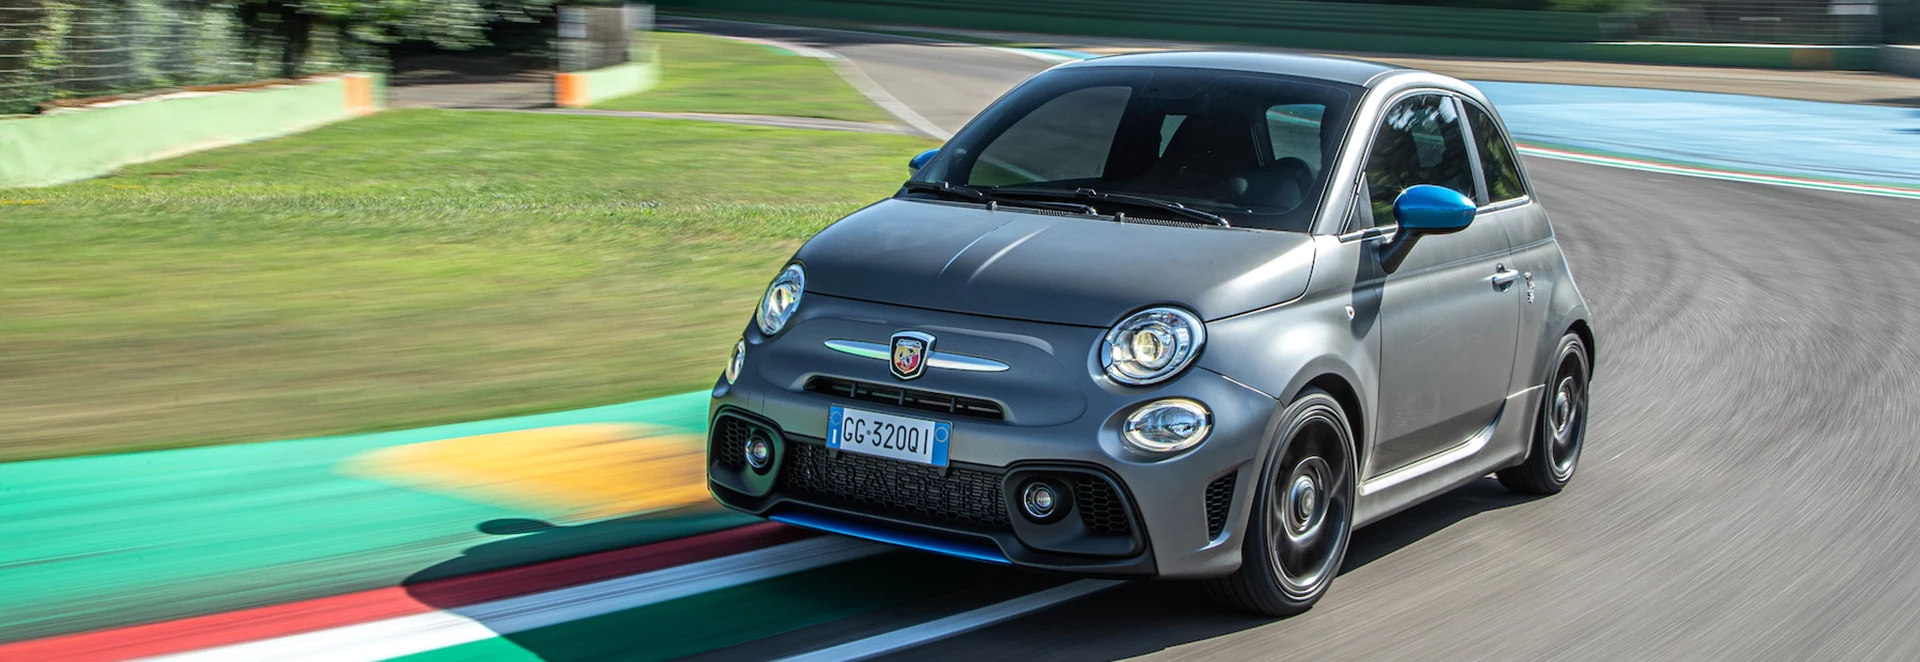 Abarth introduces new F595 special edition to celebrate past single-seater racing victories 